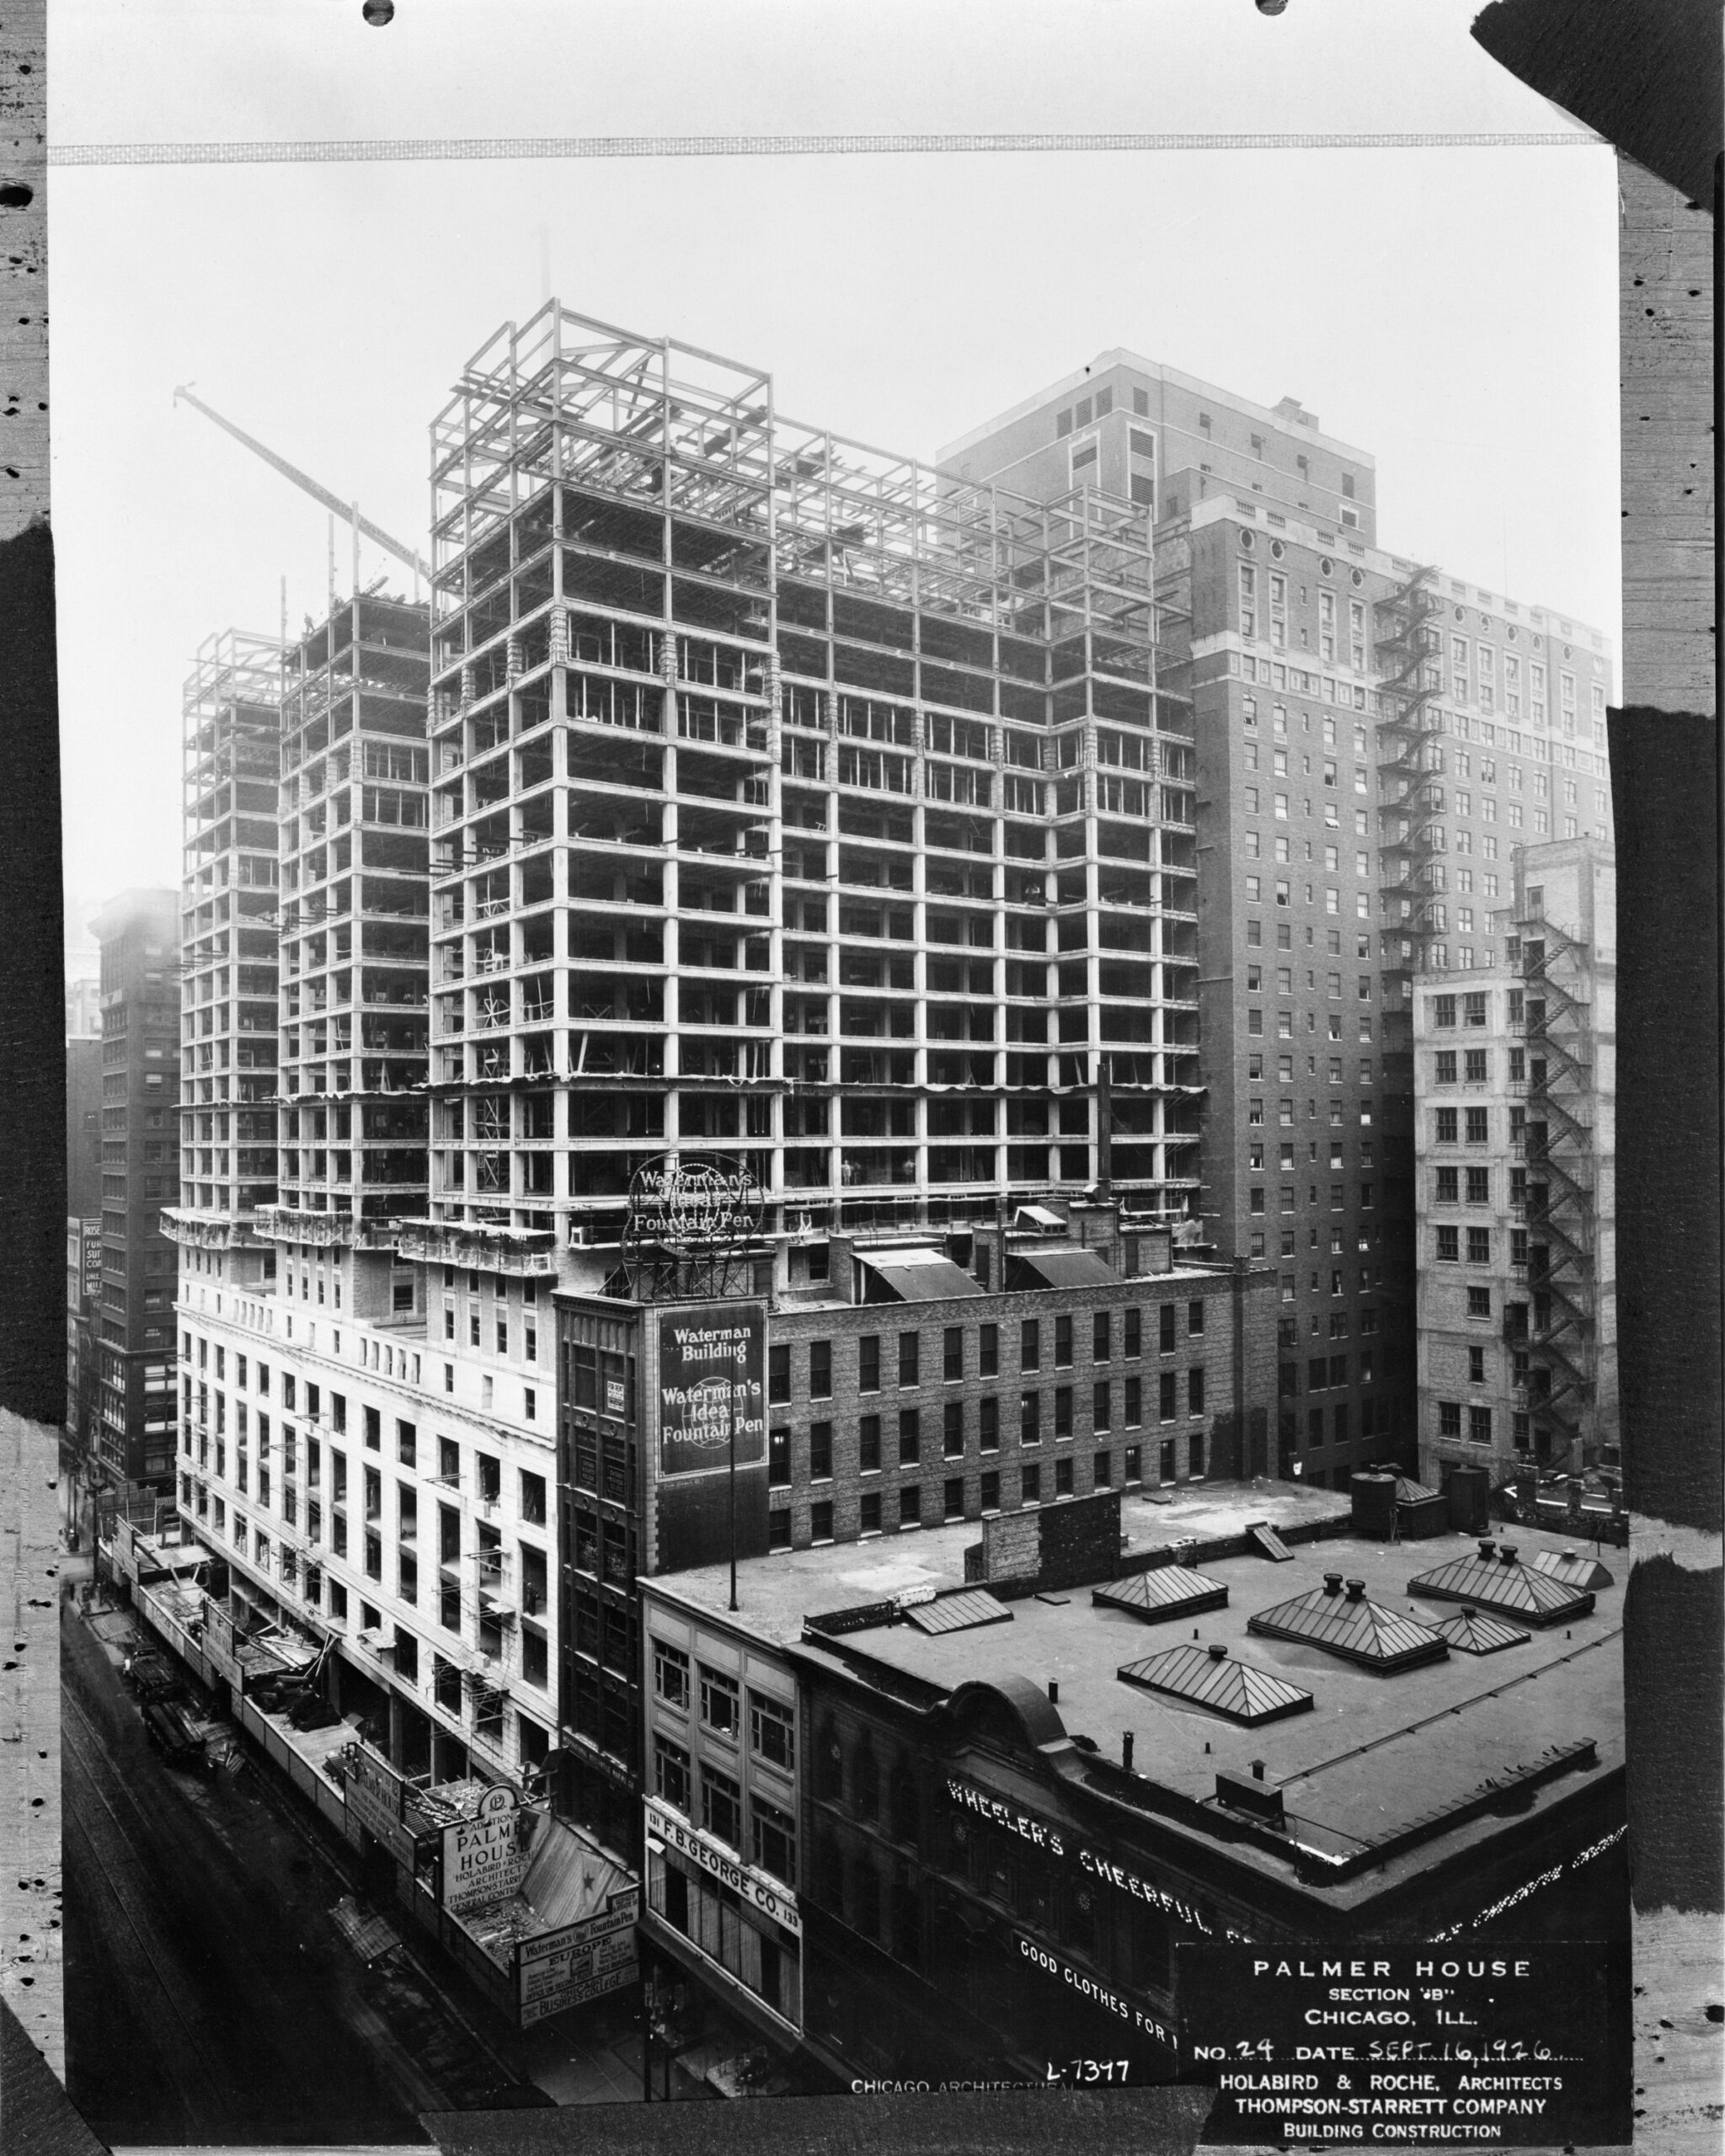 Exterior view of the Palmer House hotel under construction, in Chicago, Illinois, September 16, 1926. Photographed or reprinted for architects Holabird & Root.